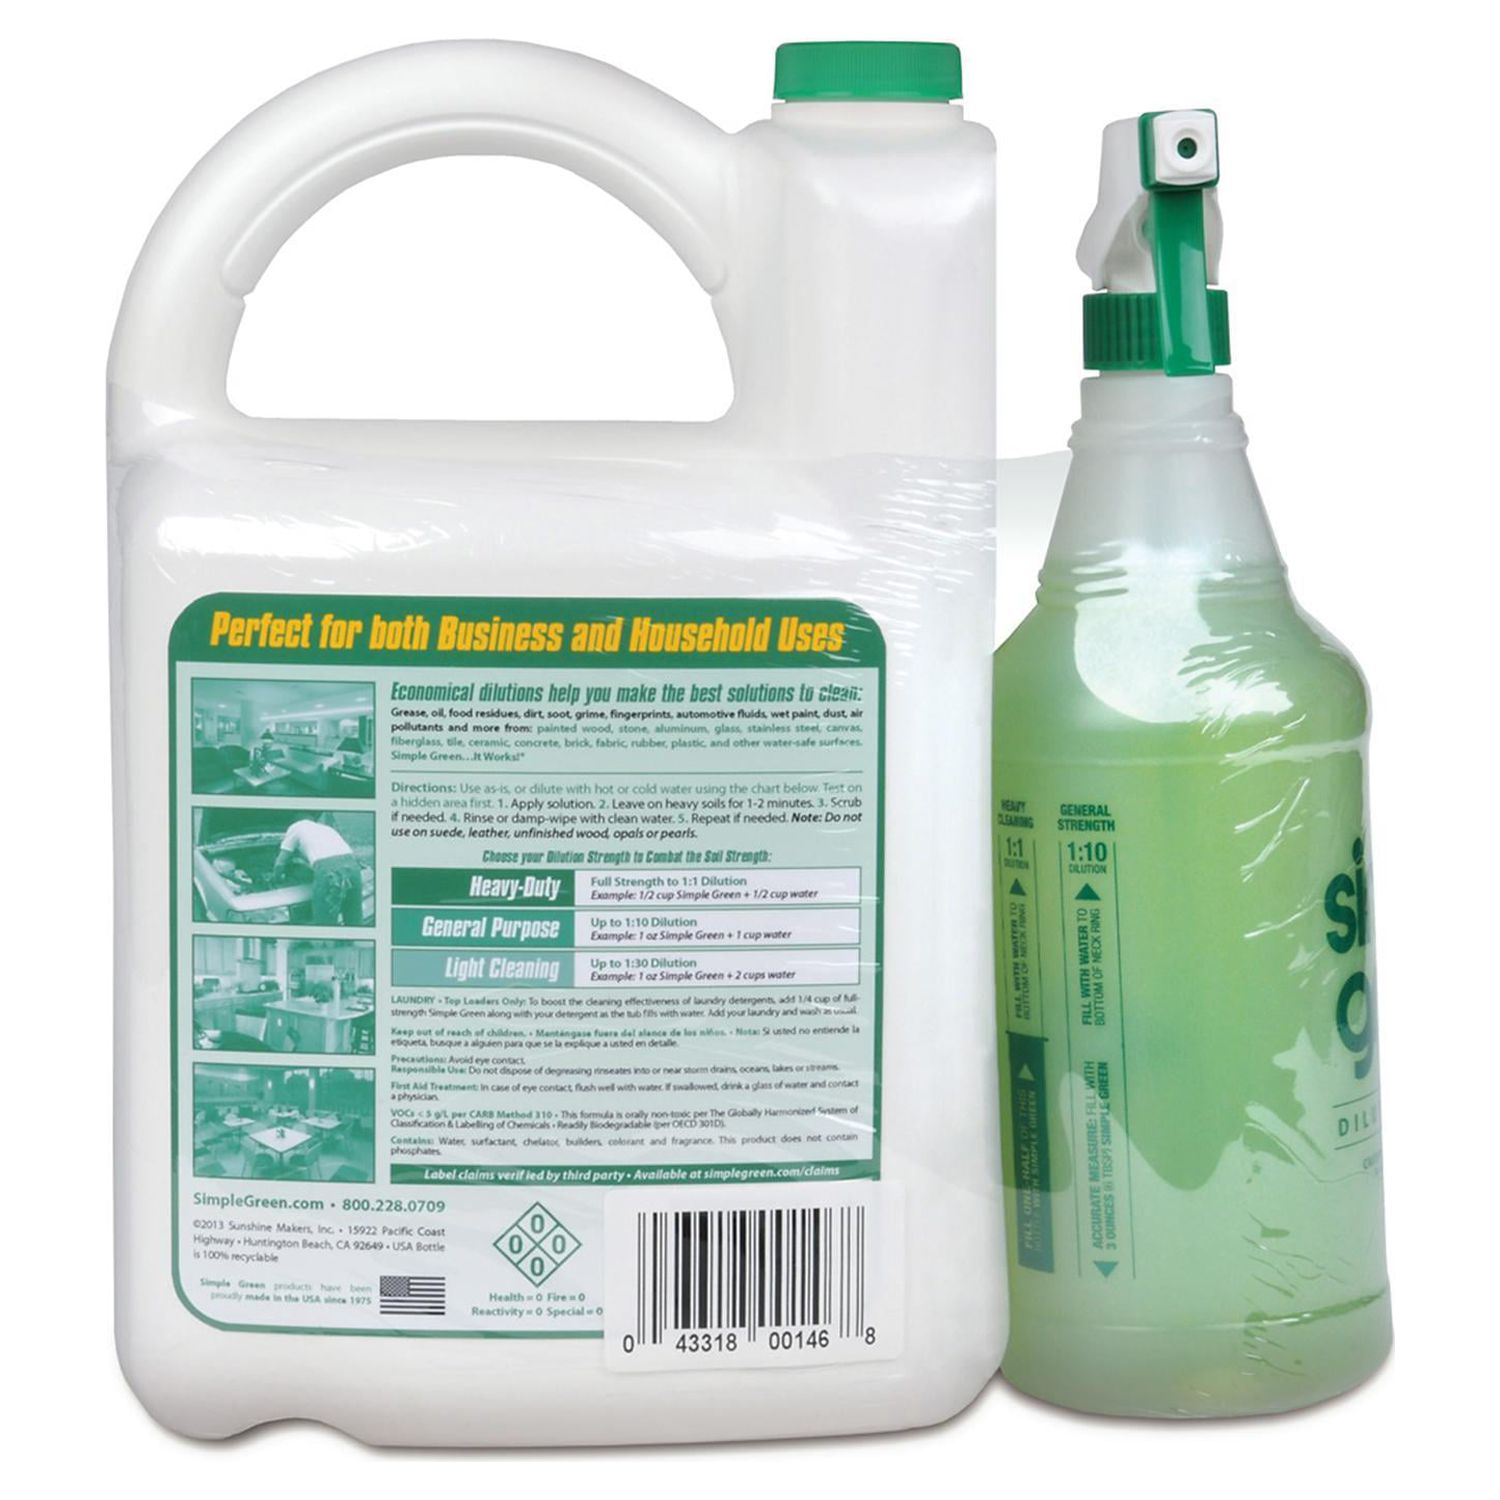 Simple Green All Purpose Cleaner Spray & Refill, 172 Oz - image 4 of 6